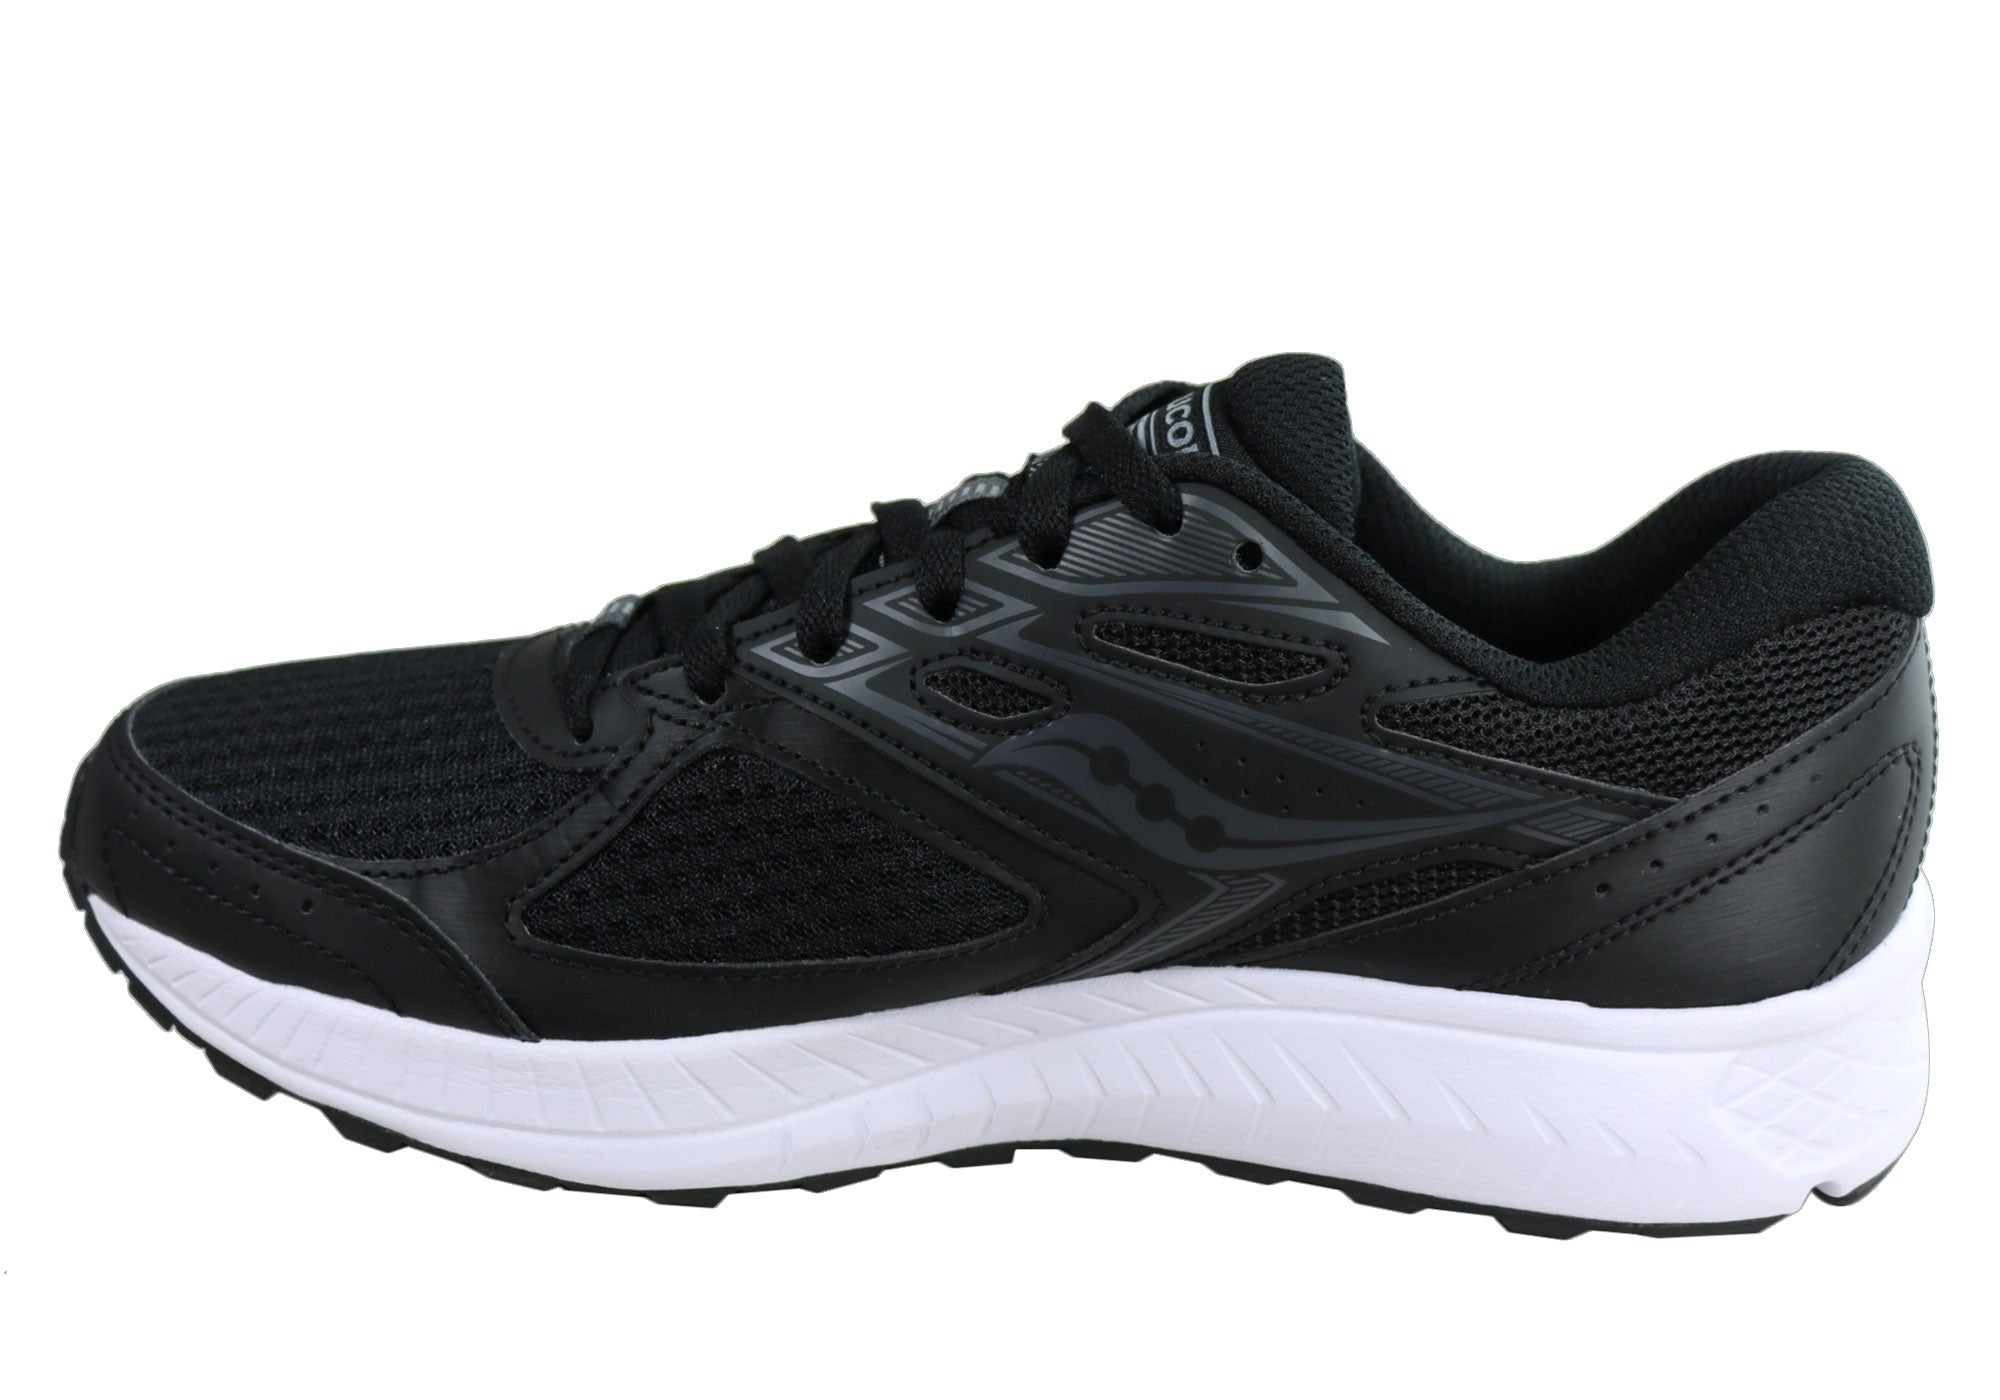 NEW SAUCONY MENS COHESION 13 COMFORTABLE CUSHIONED ATHLETIC SHOES | eBay